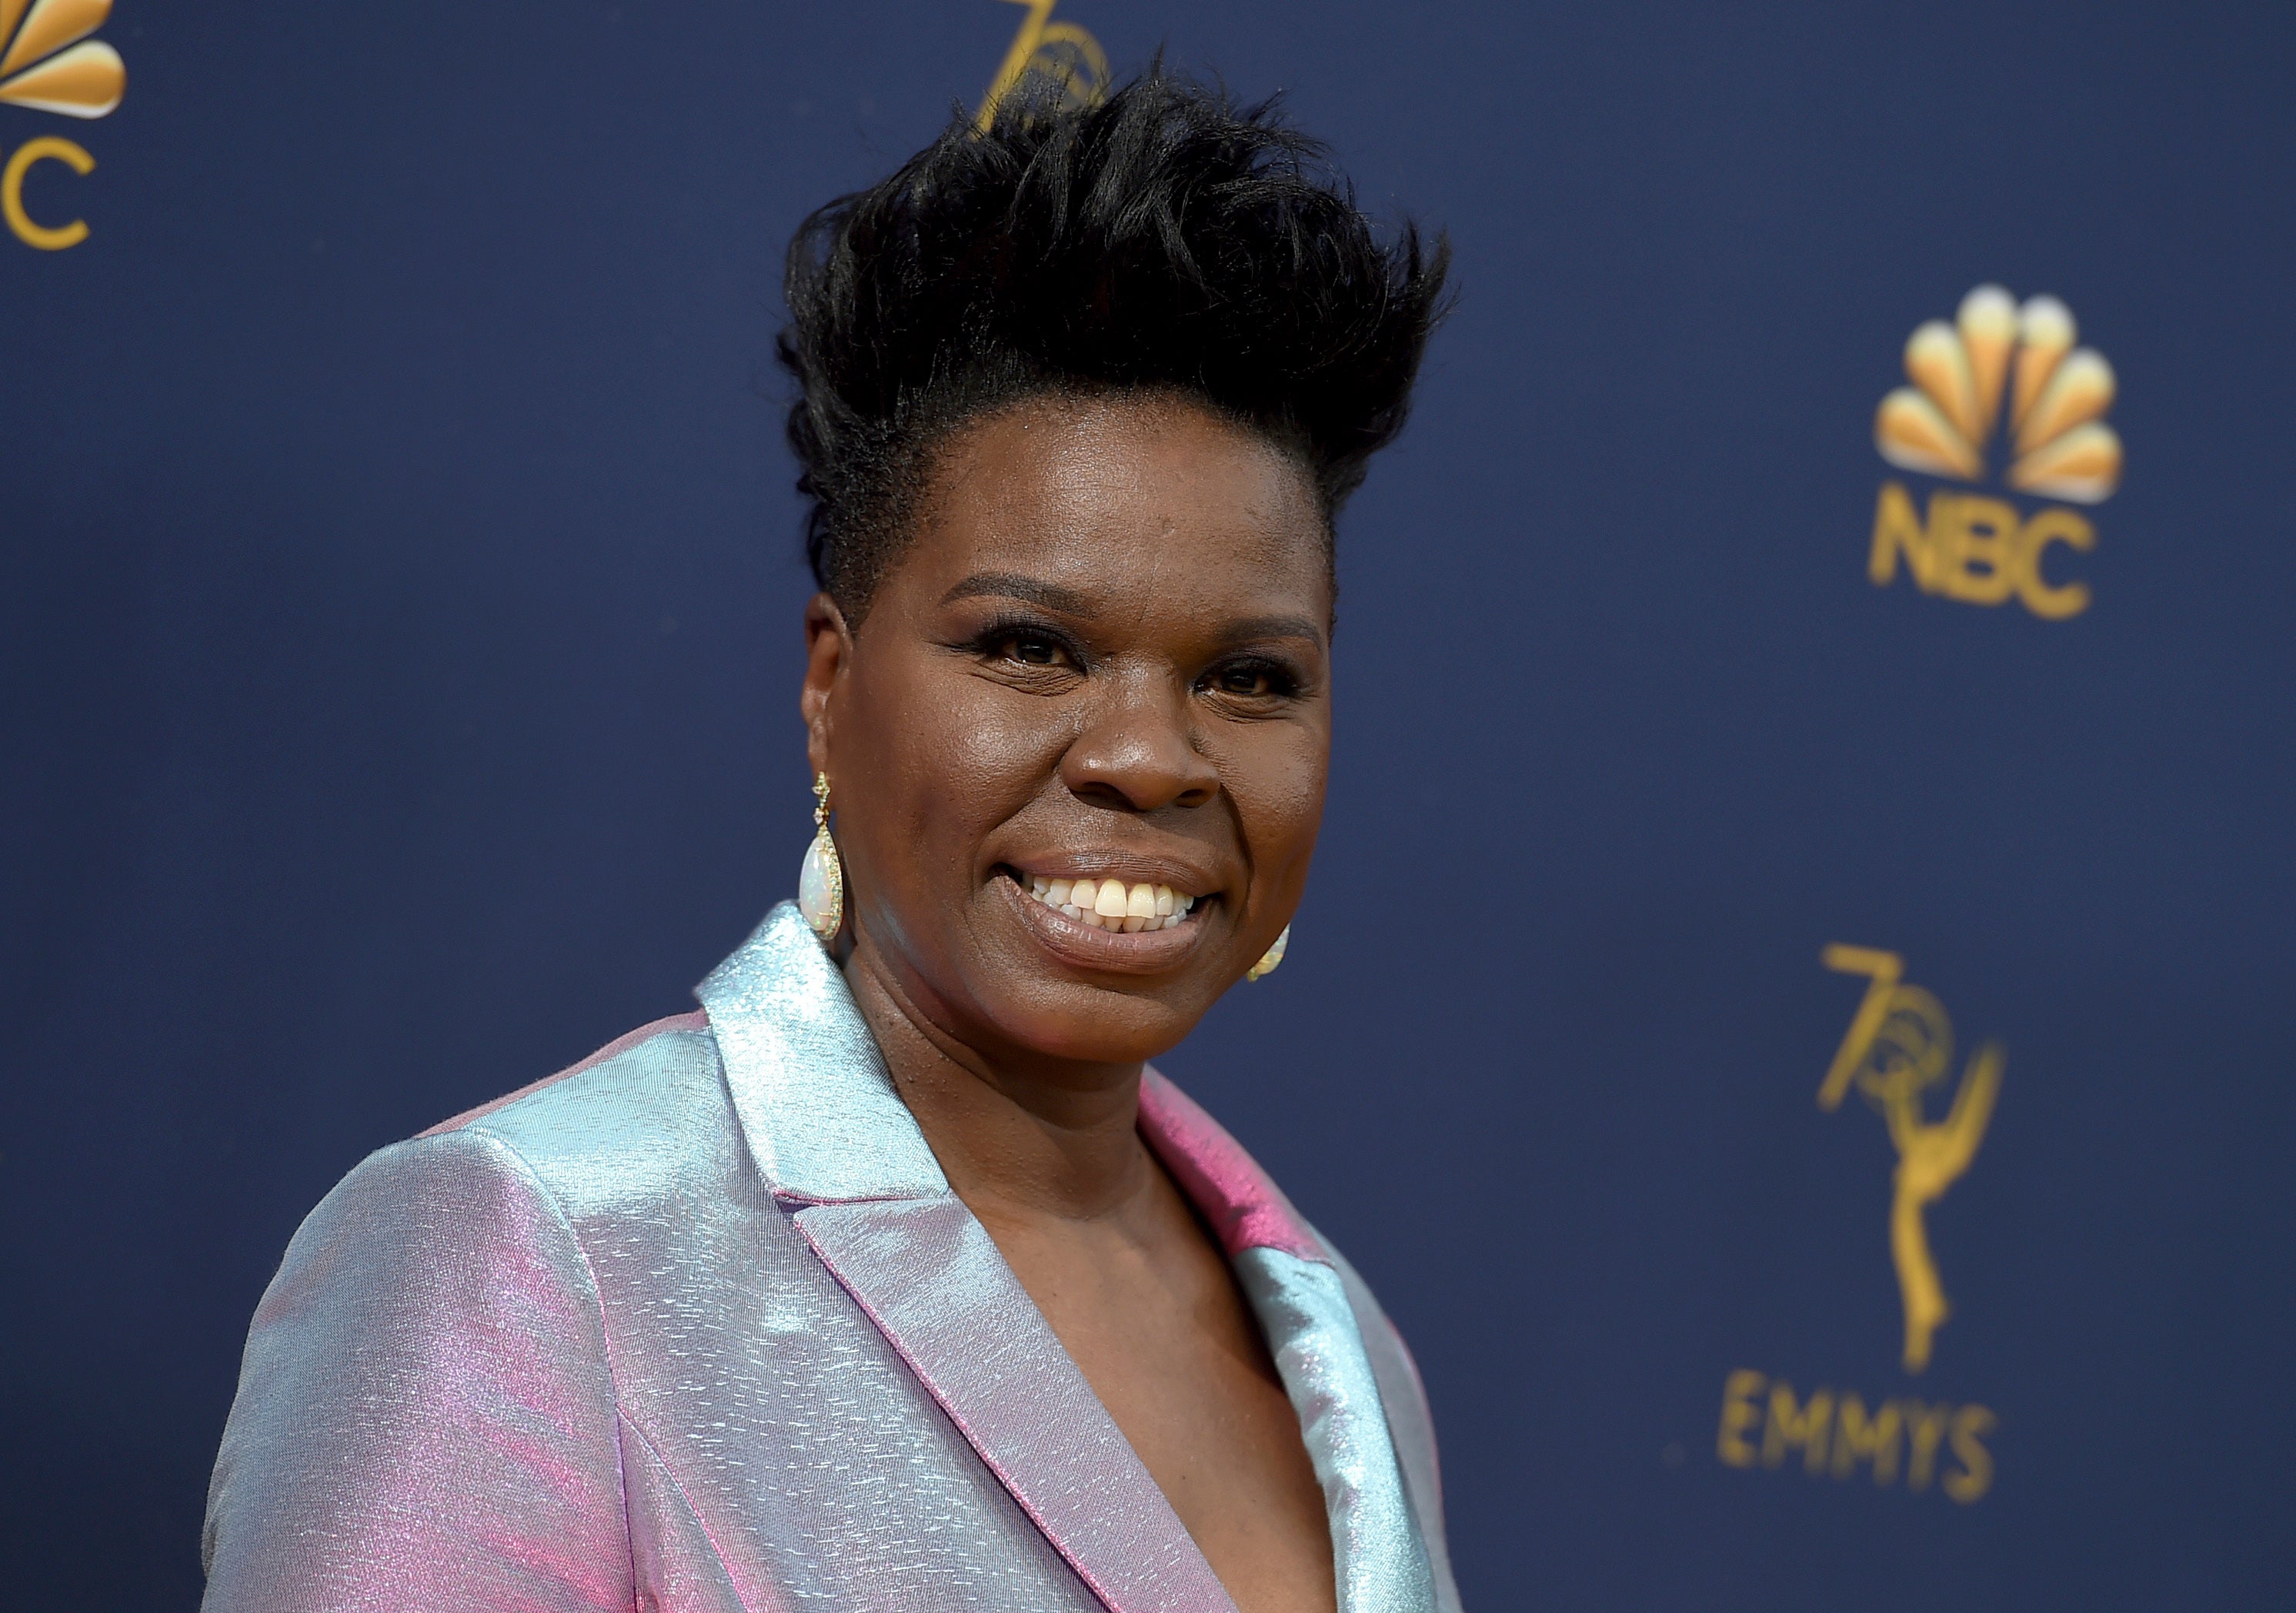 Leslie Jones promises to be herself hosting 'The Daily Show' The